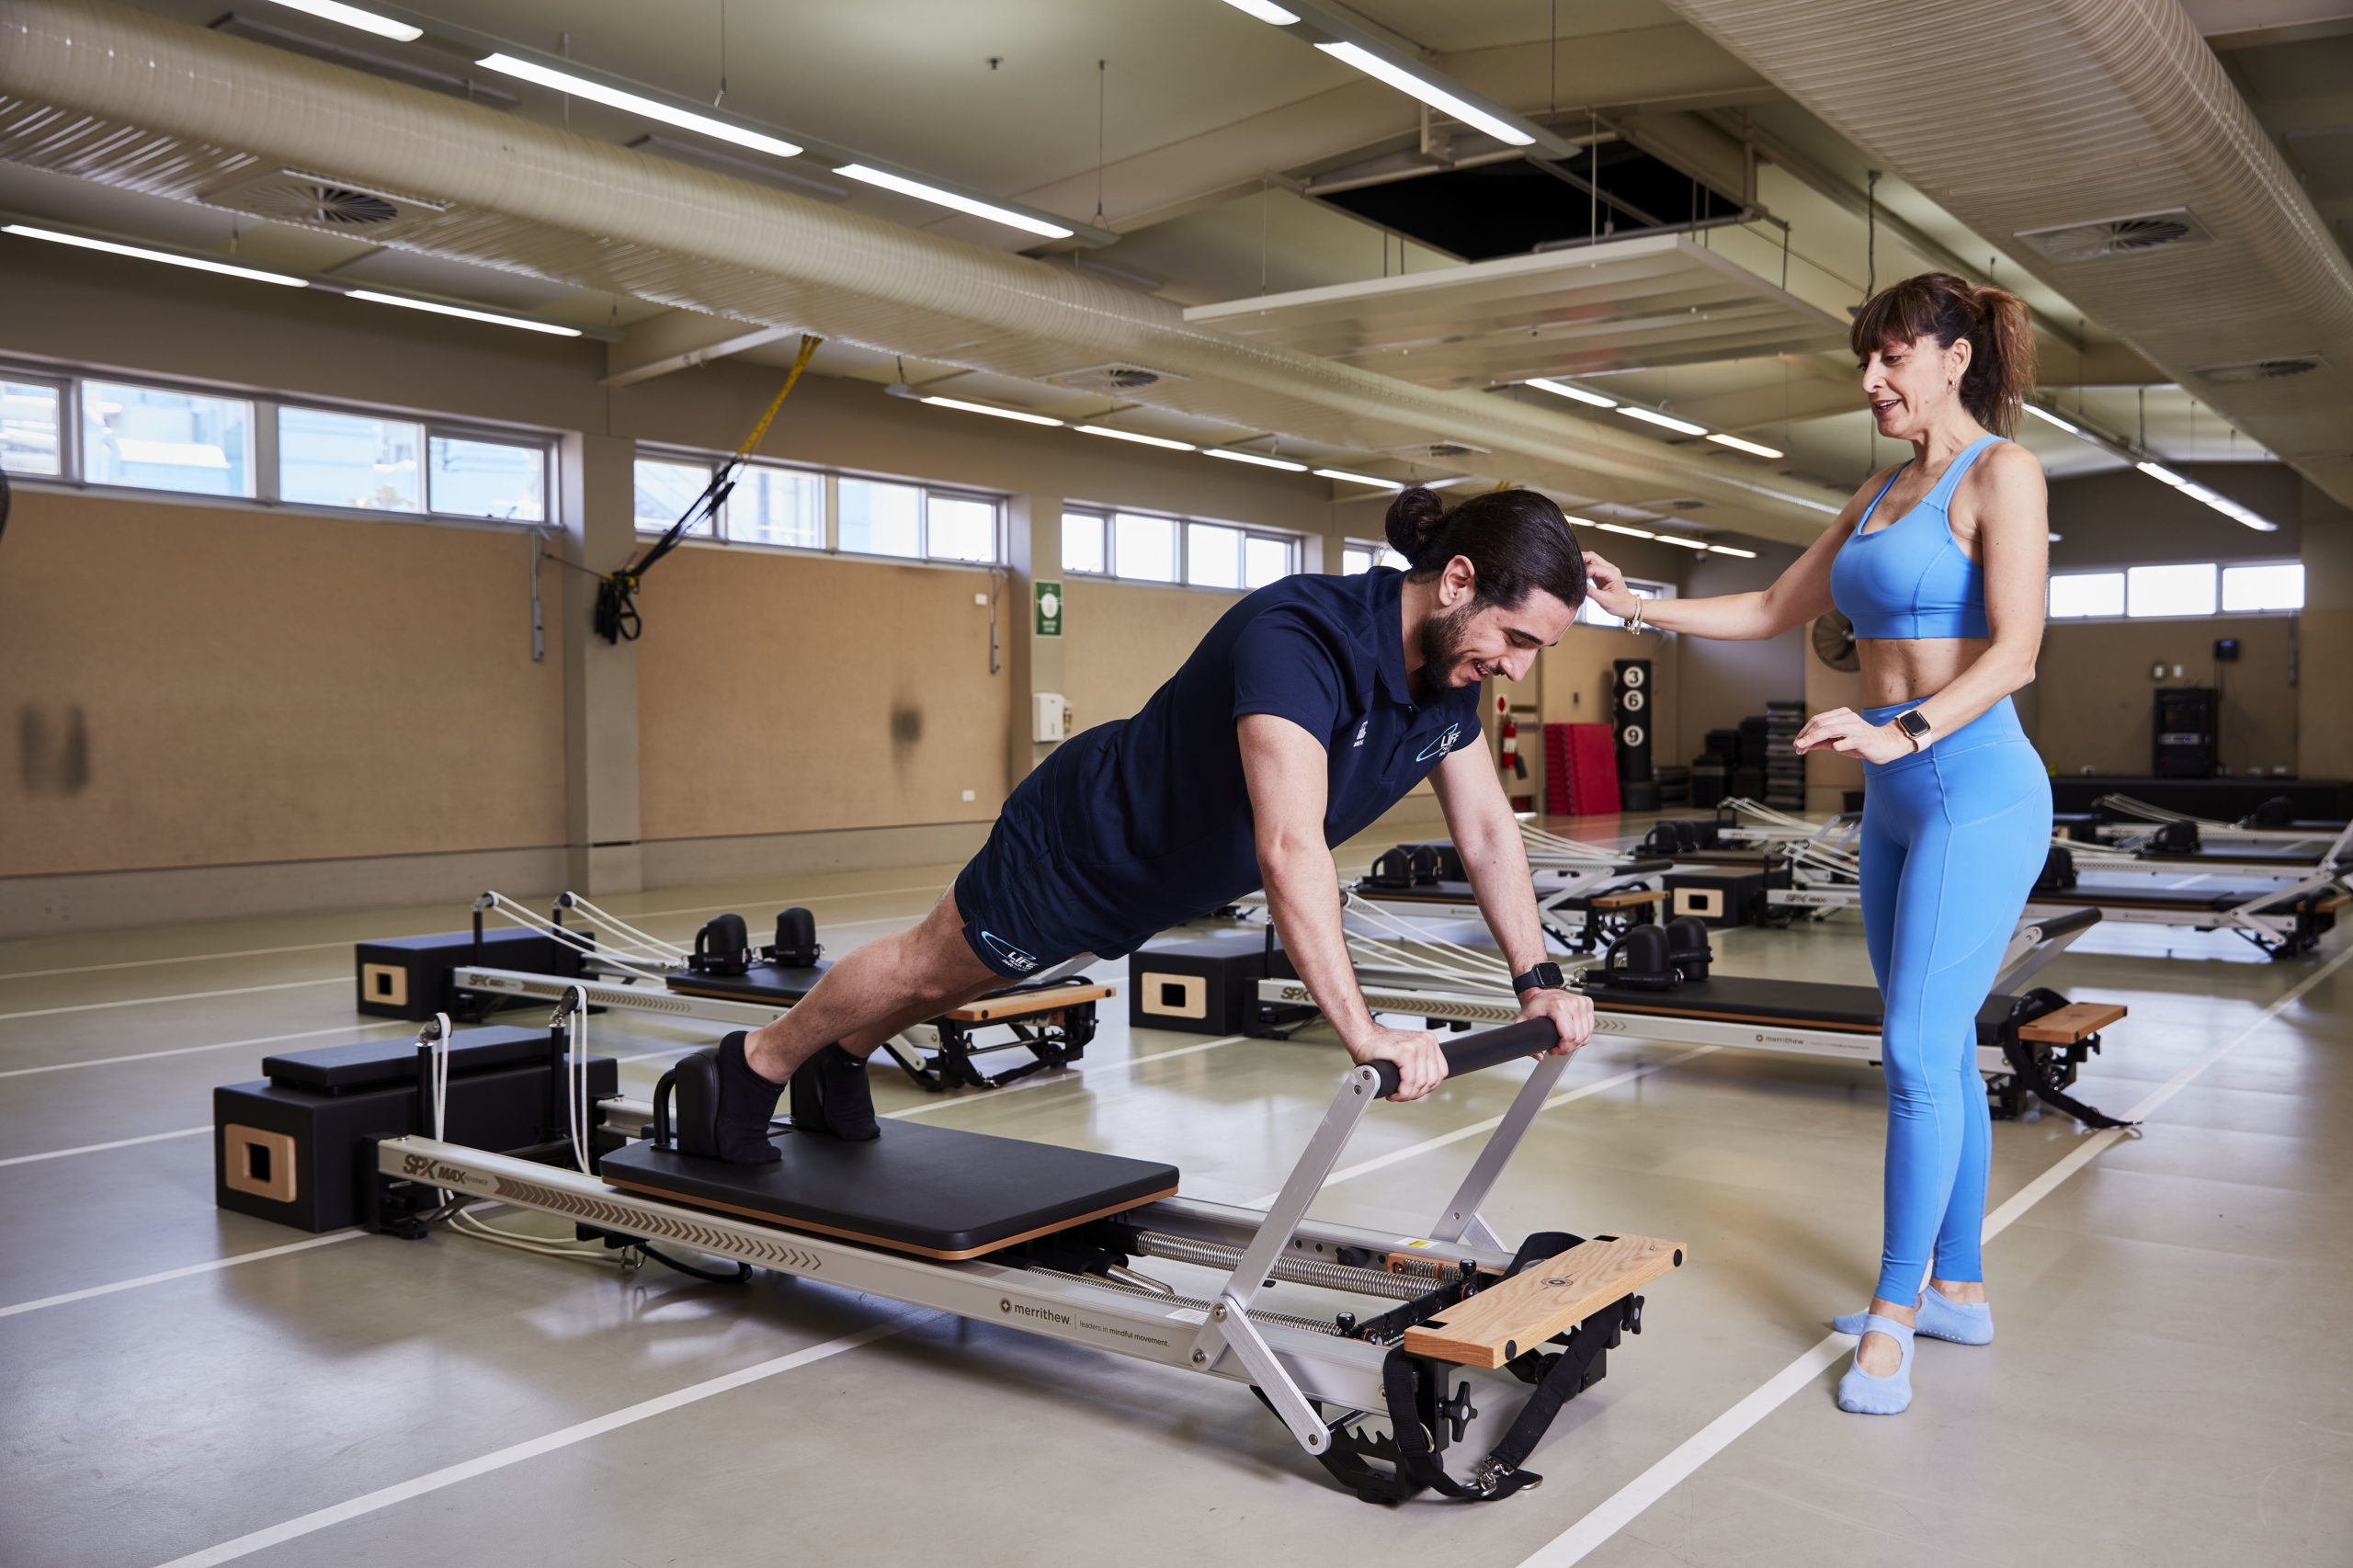 How Will Reformer Pilates Change My Body, What Should You Know - Vibe  Pilates